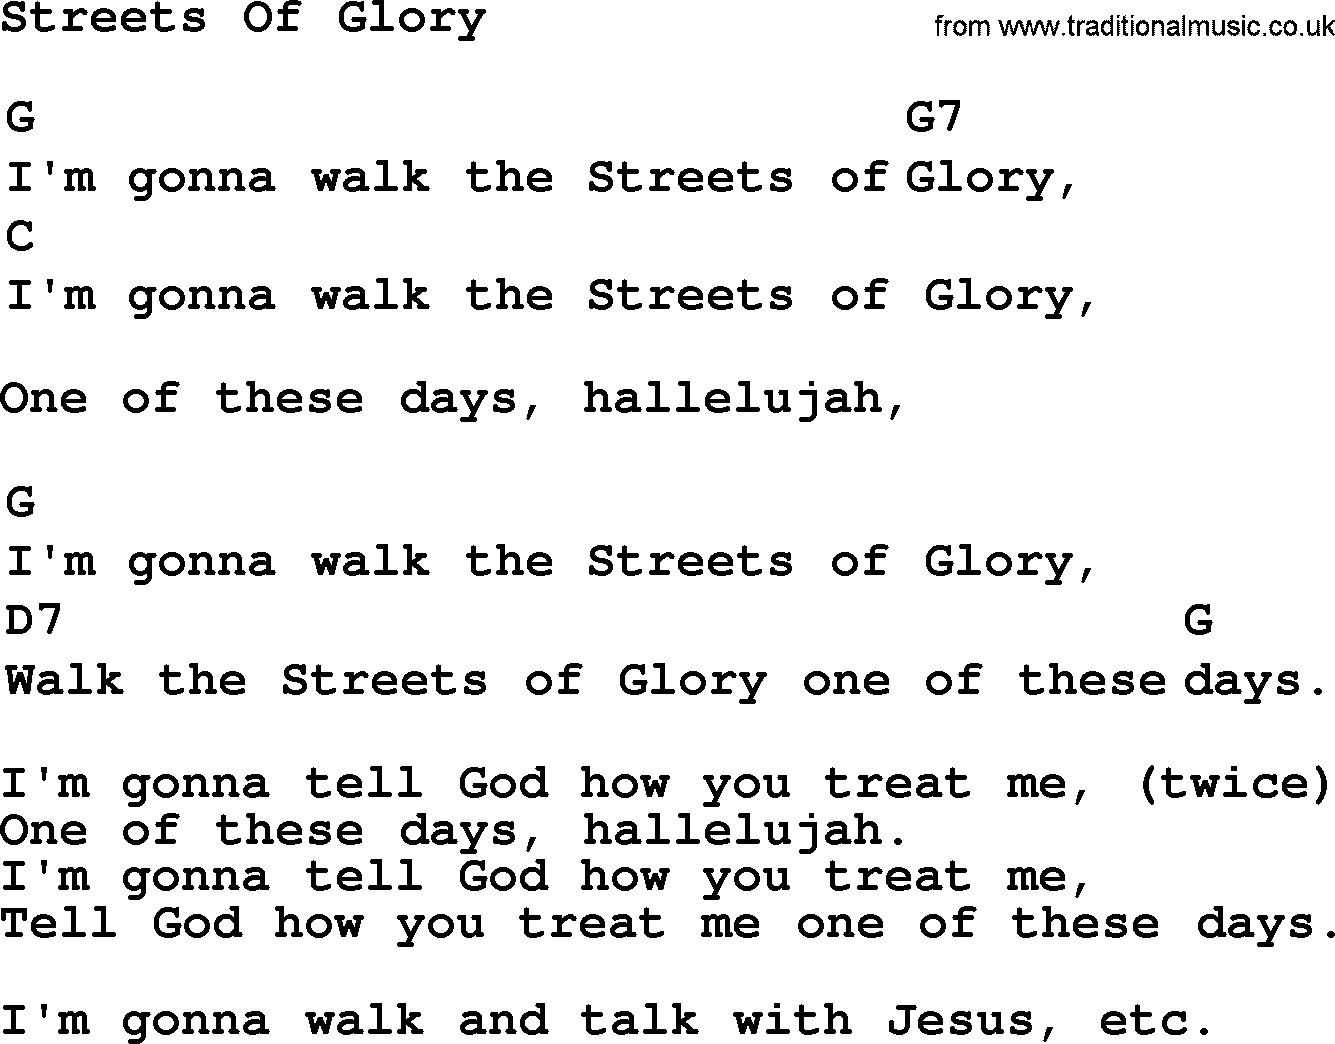 Top 1000 Most Popular Folk and Old-time Songs: Streets Of Glory, lyrics and chords